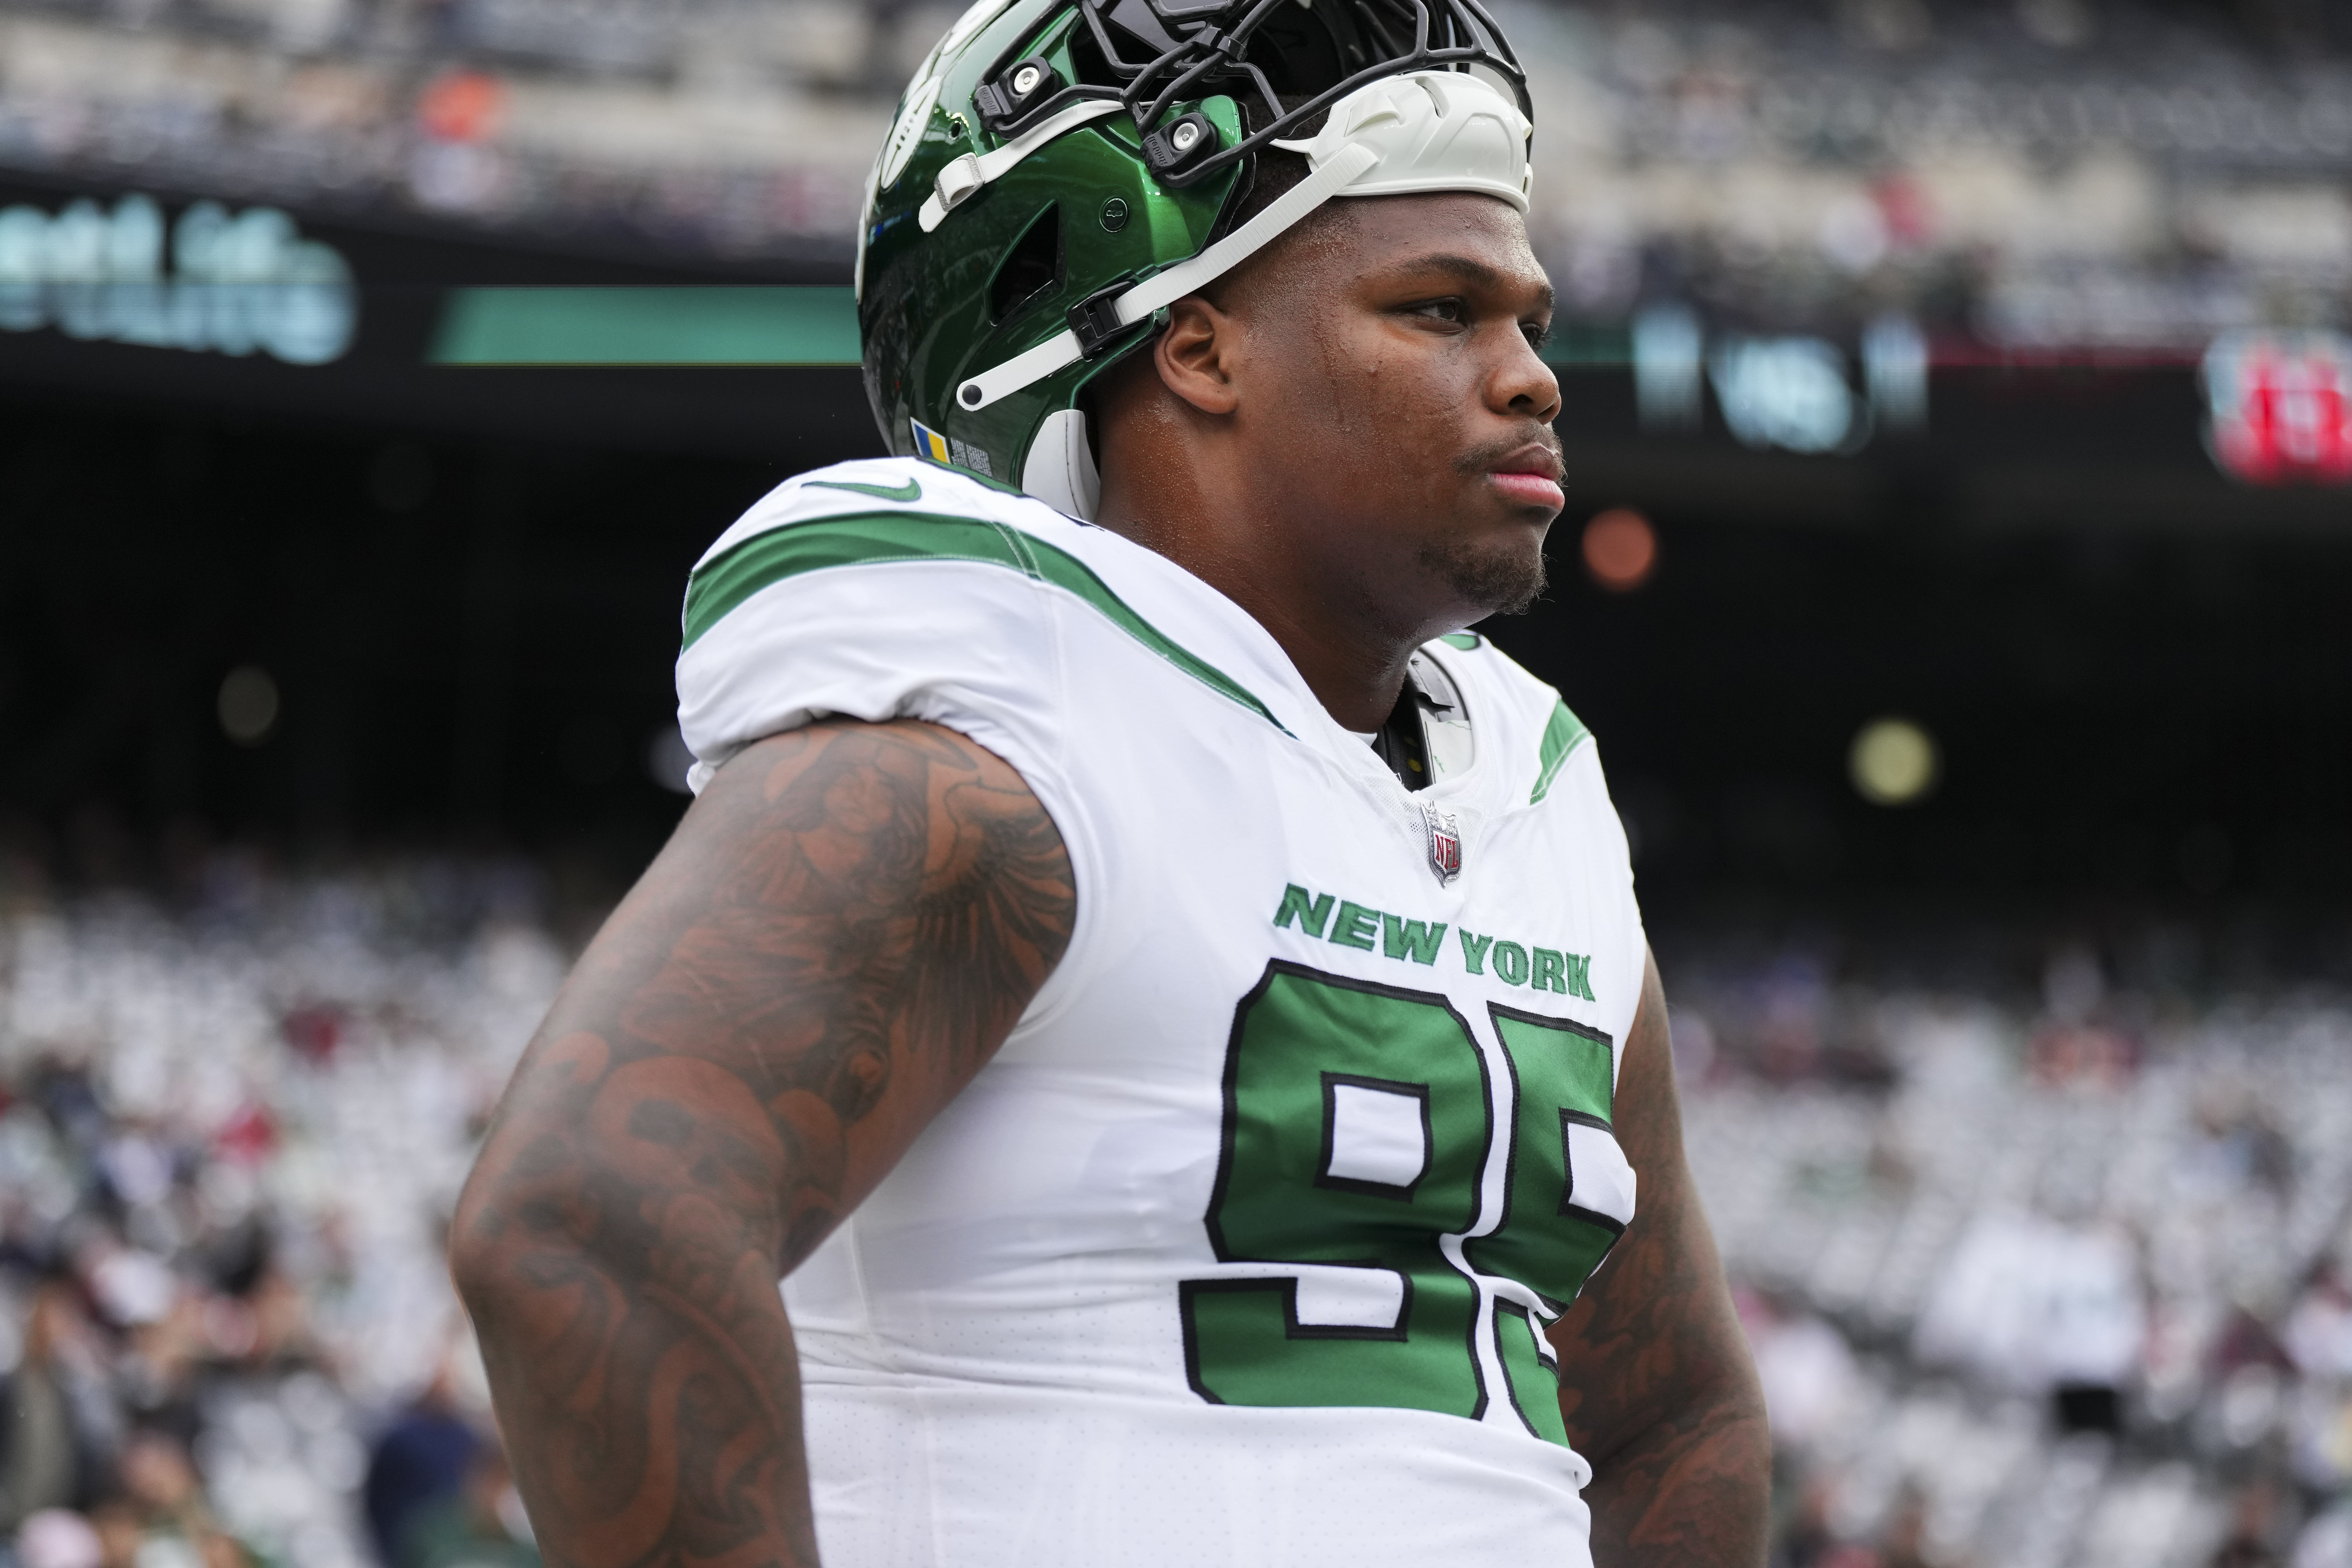 Quinnen Williams #95 of the New York Jets warms up against the Cincinnati Bengals at MetLife Stadium on September 25, 2022 in East Rutherford, New Jersey.